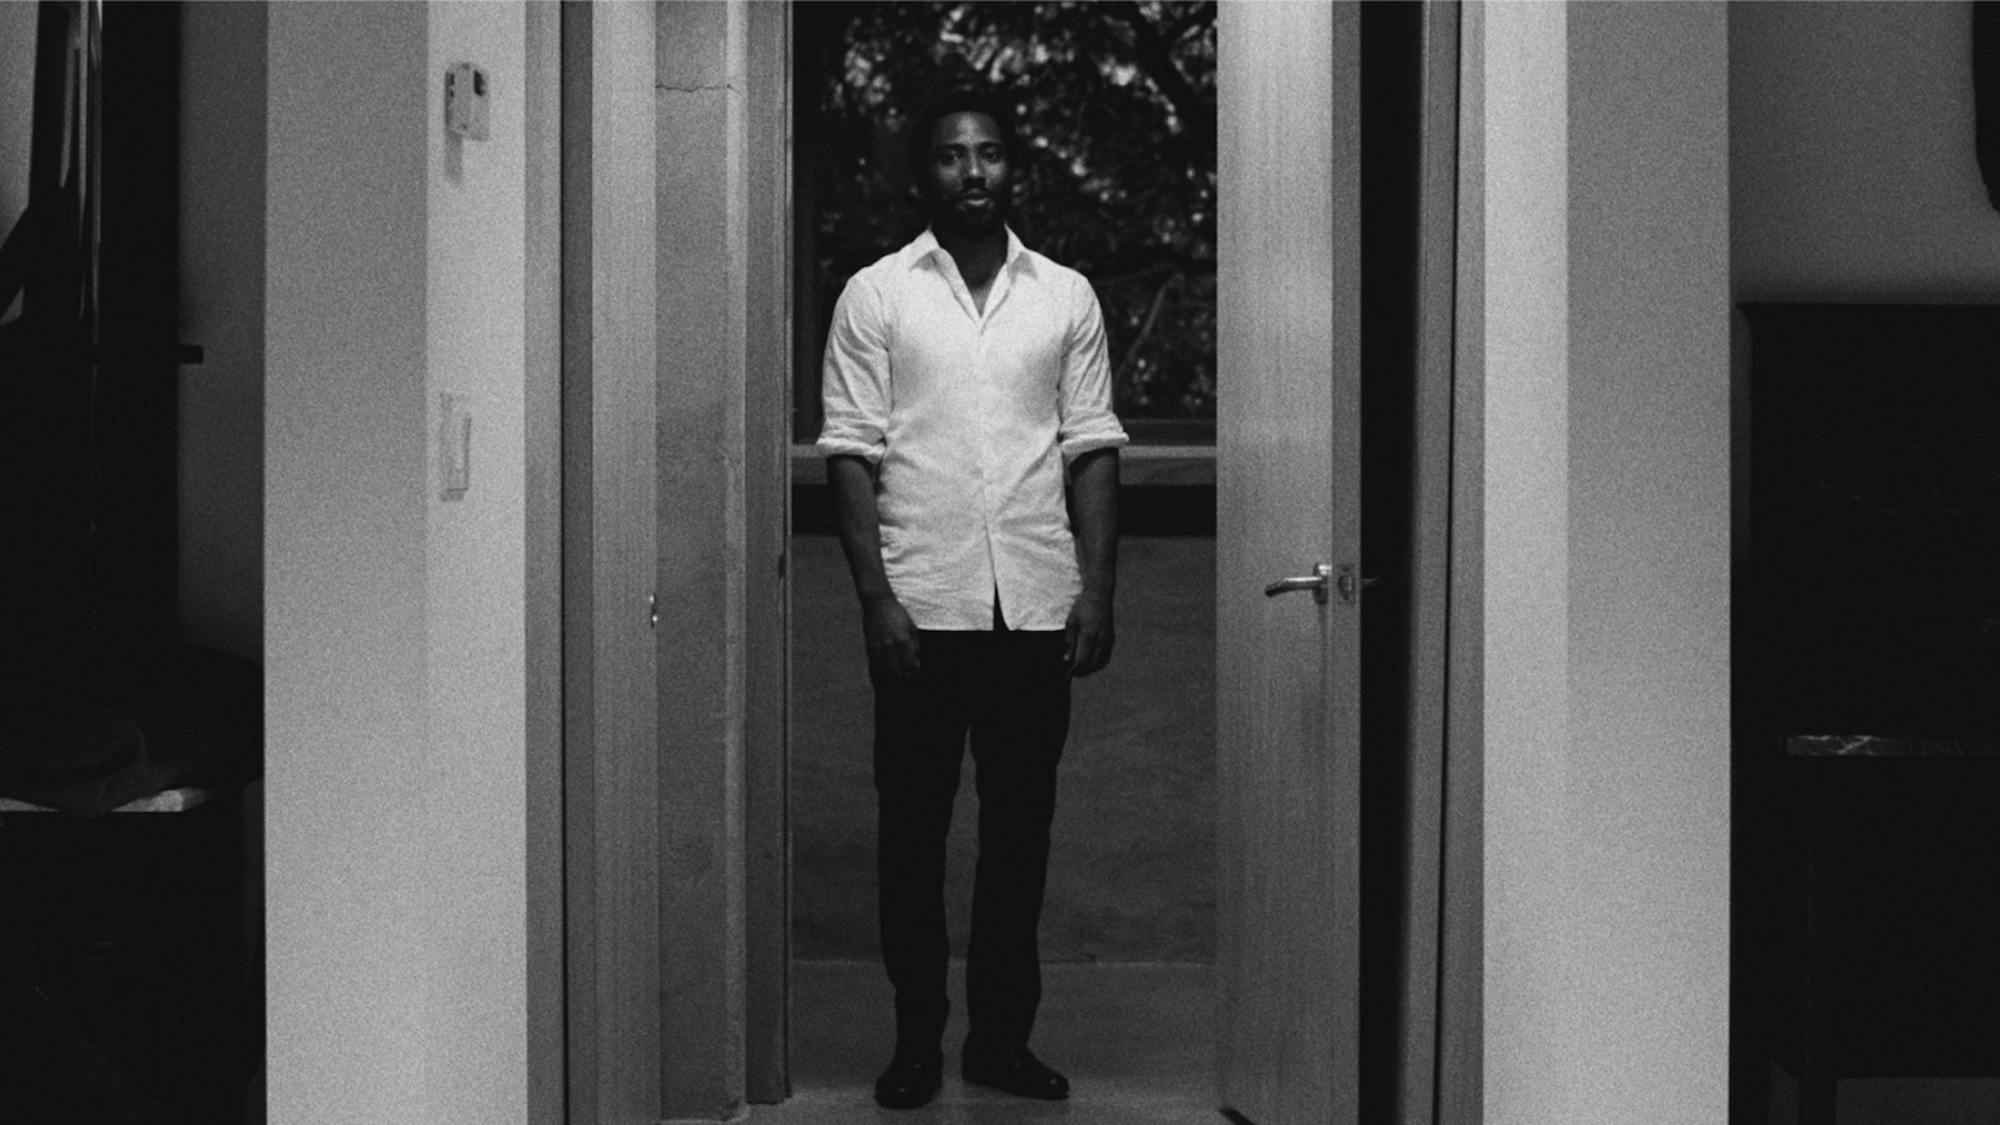 Malcolm framed in a doorway, wearing a white shirt with the sleeves rolled up.